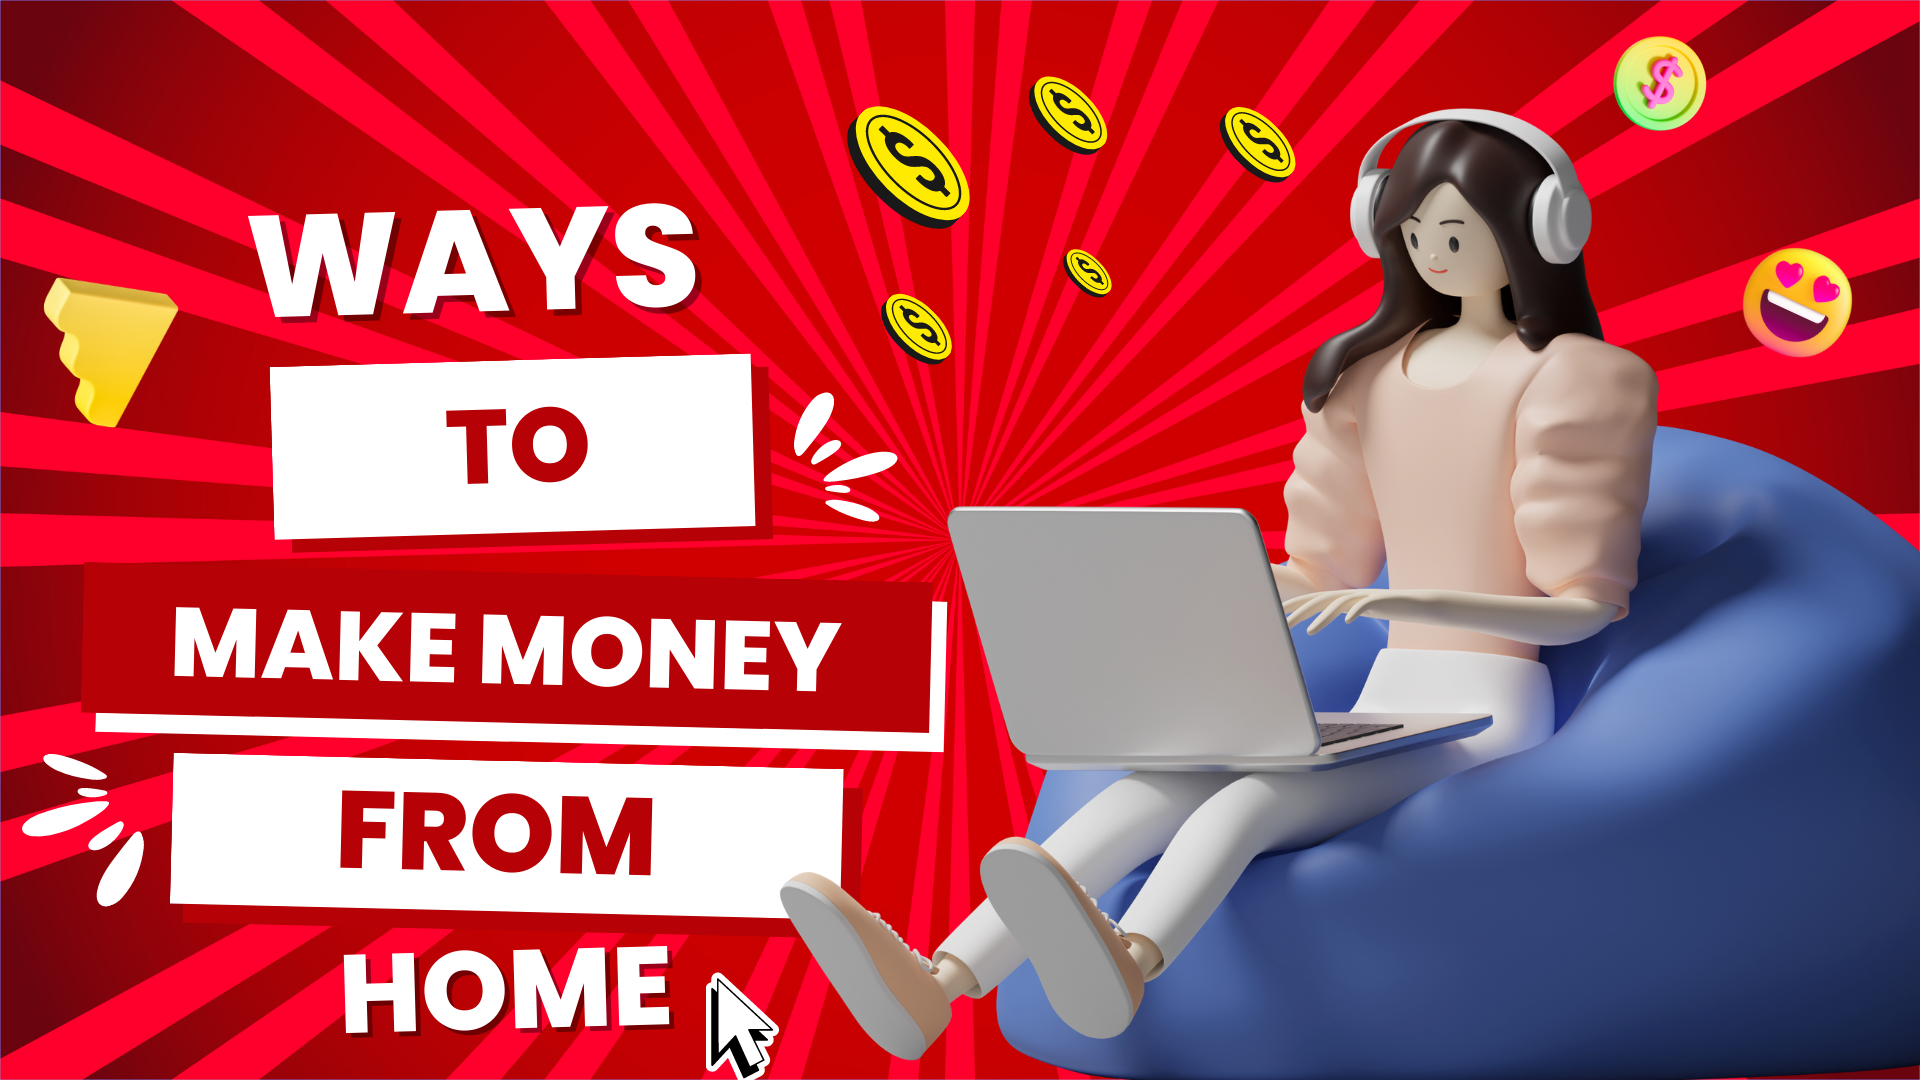 20 Ways to Make Money from Home - Plus 45 More Ideas to Spark Cash